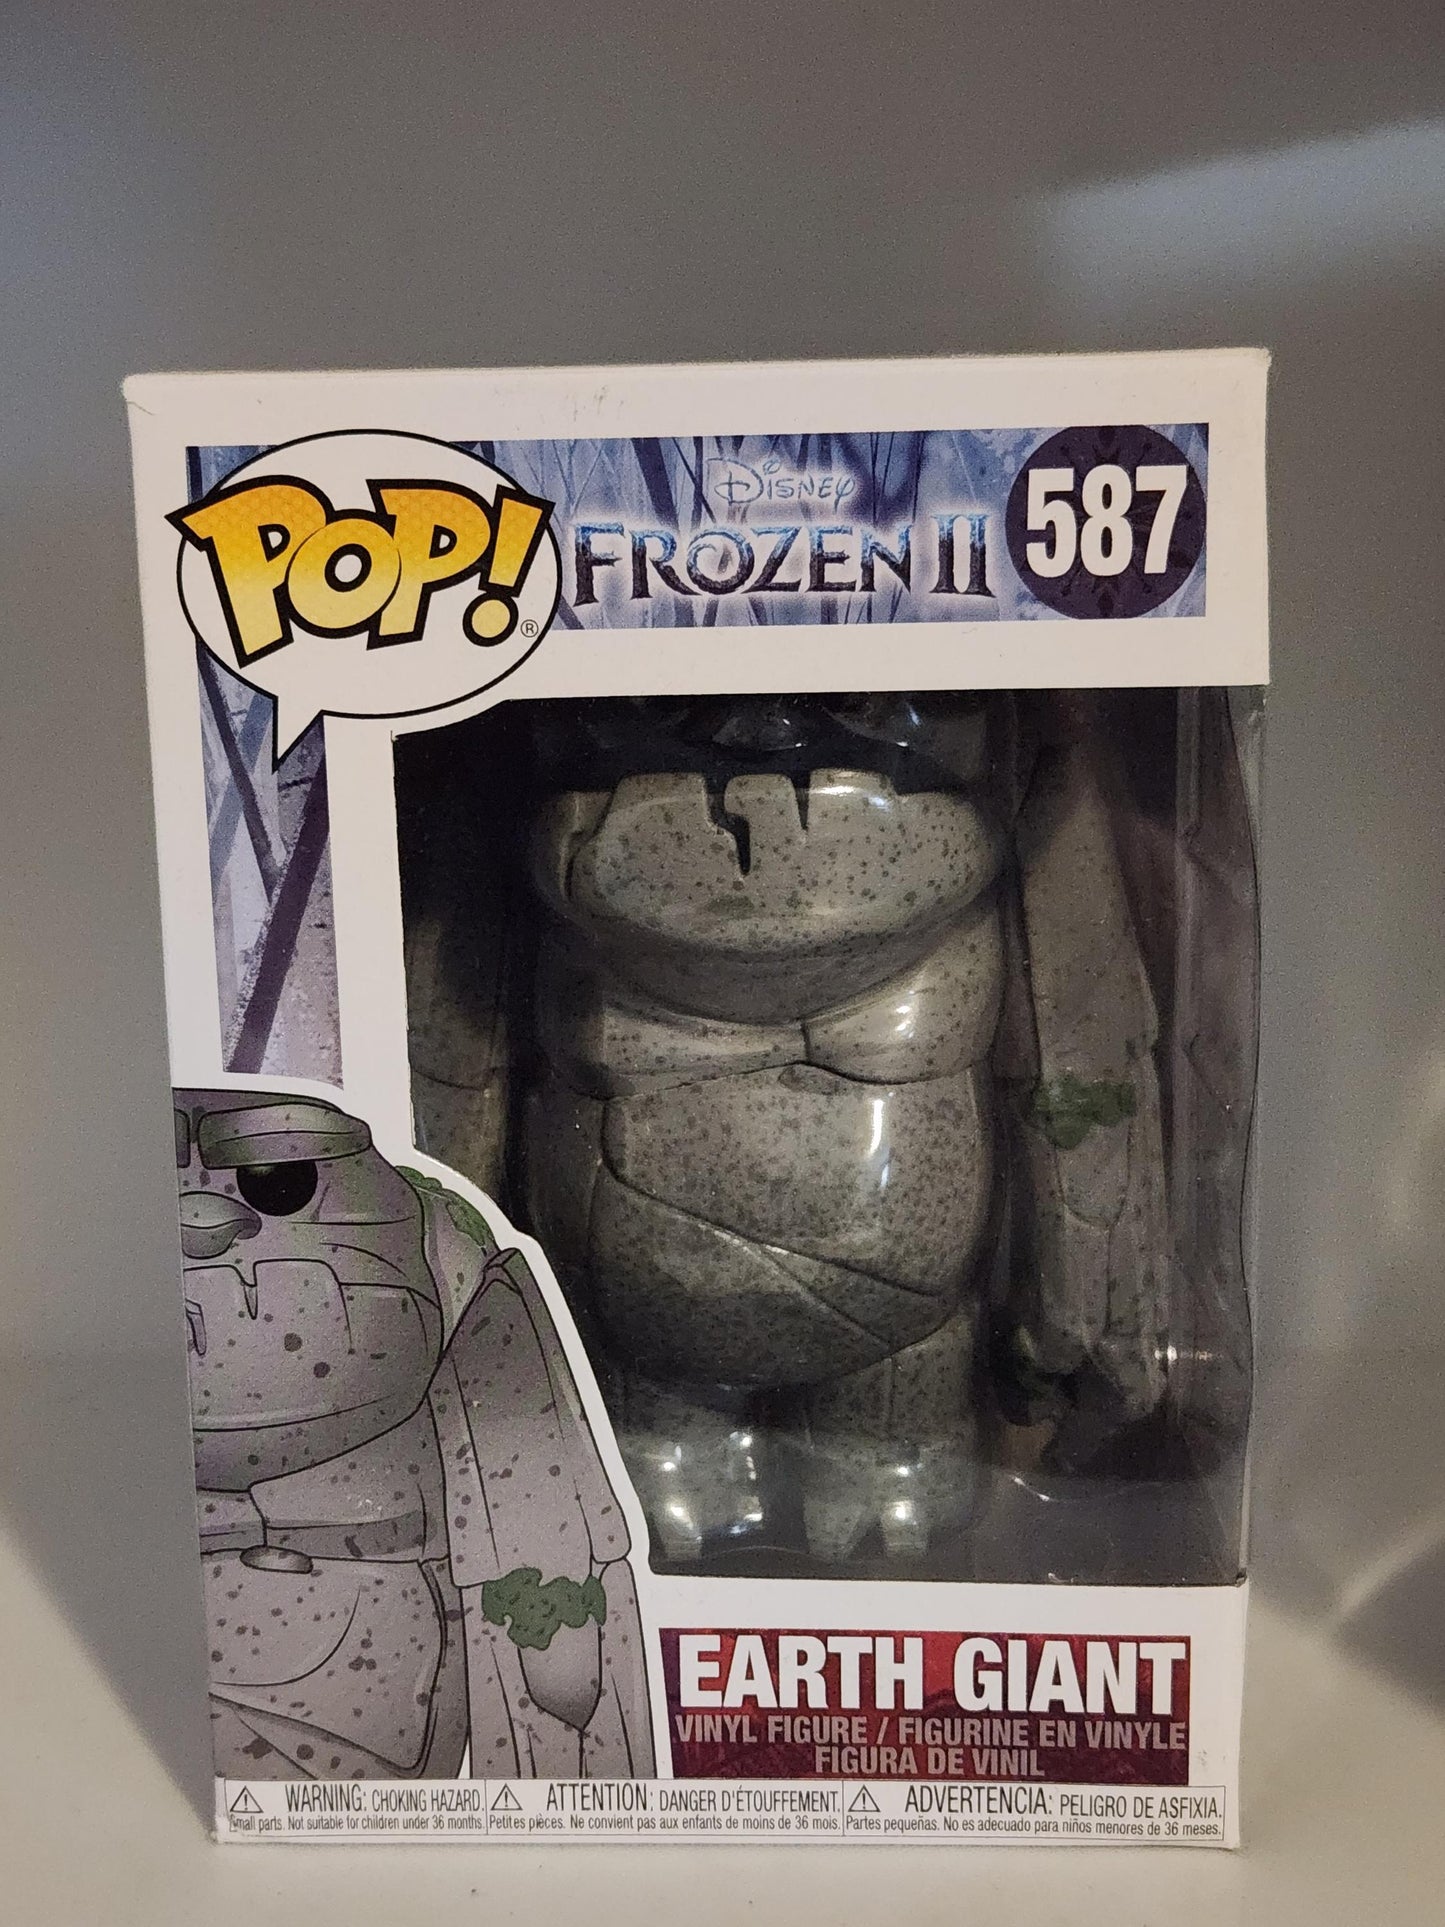 Earth Giant - #587 - Box Condition 8/10